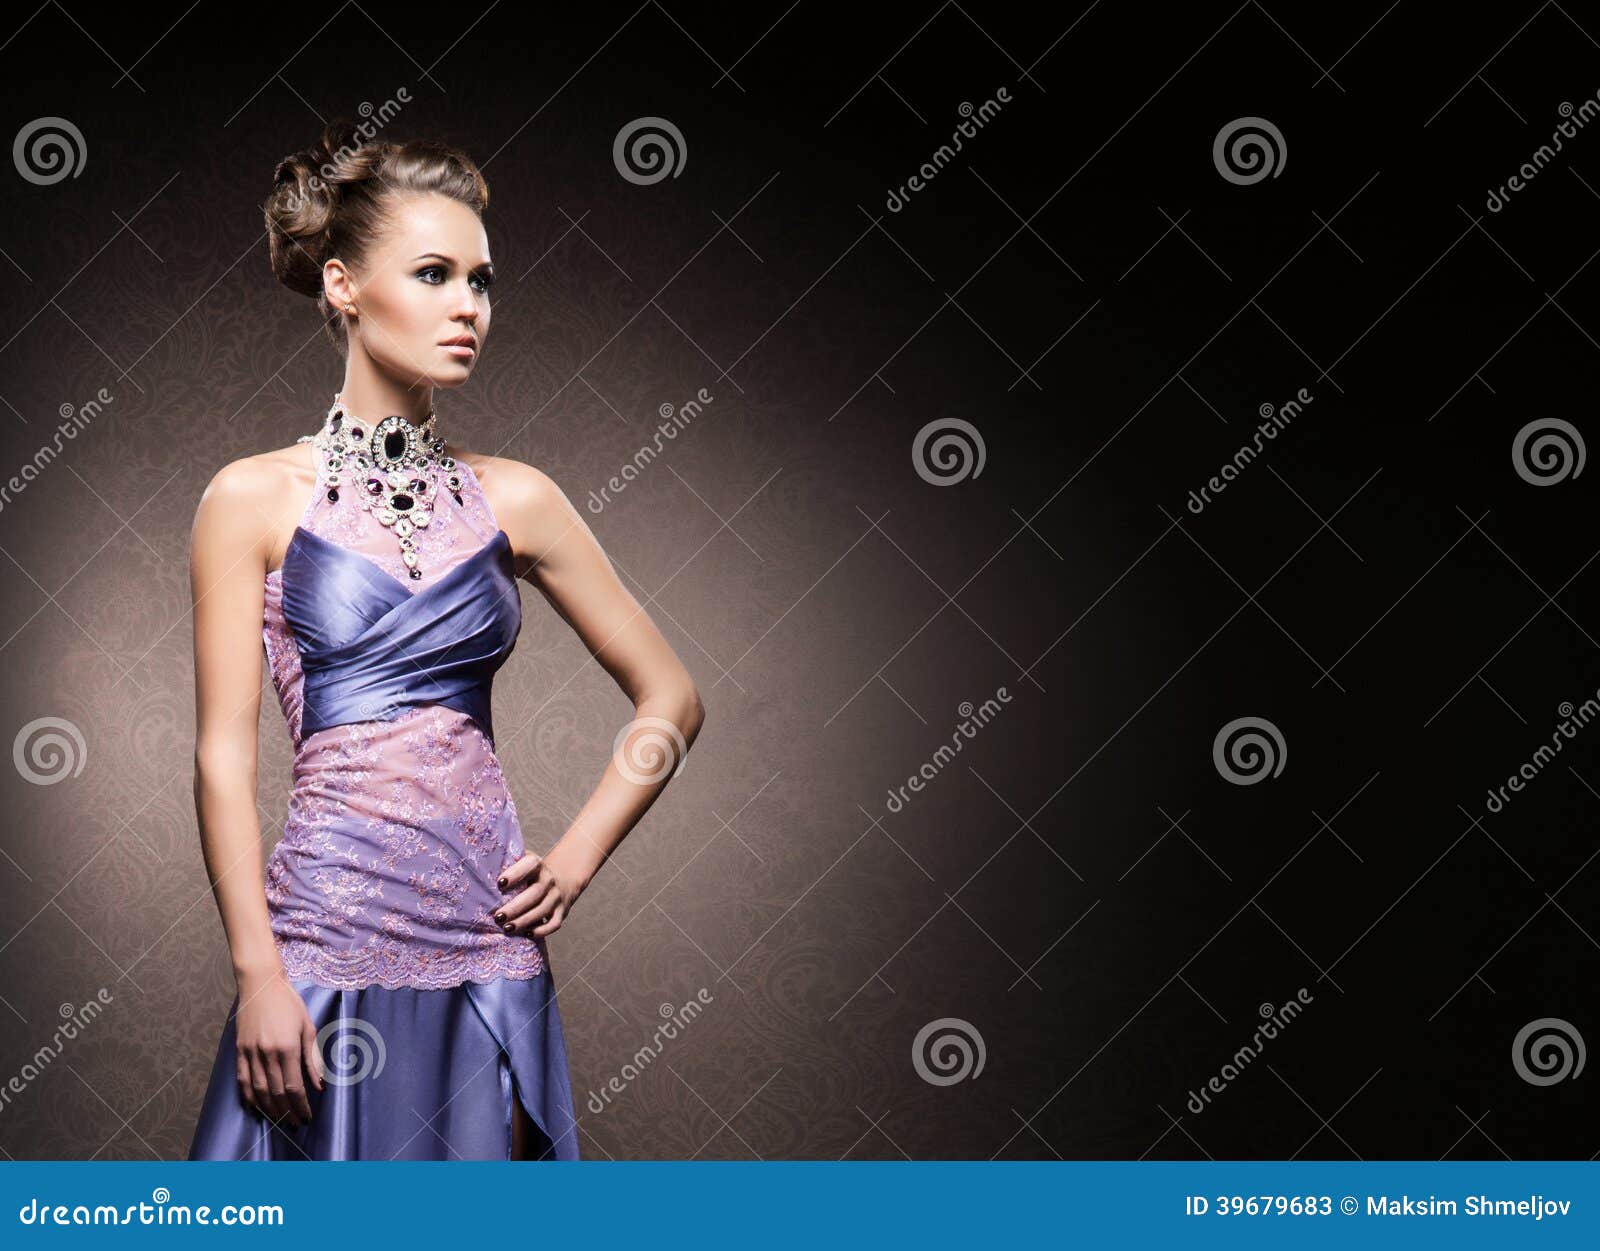 Young Nad Woman Posing in a Fashion Dress Stock Image - Image of ...